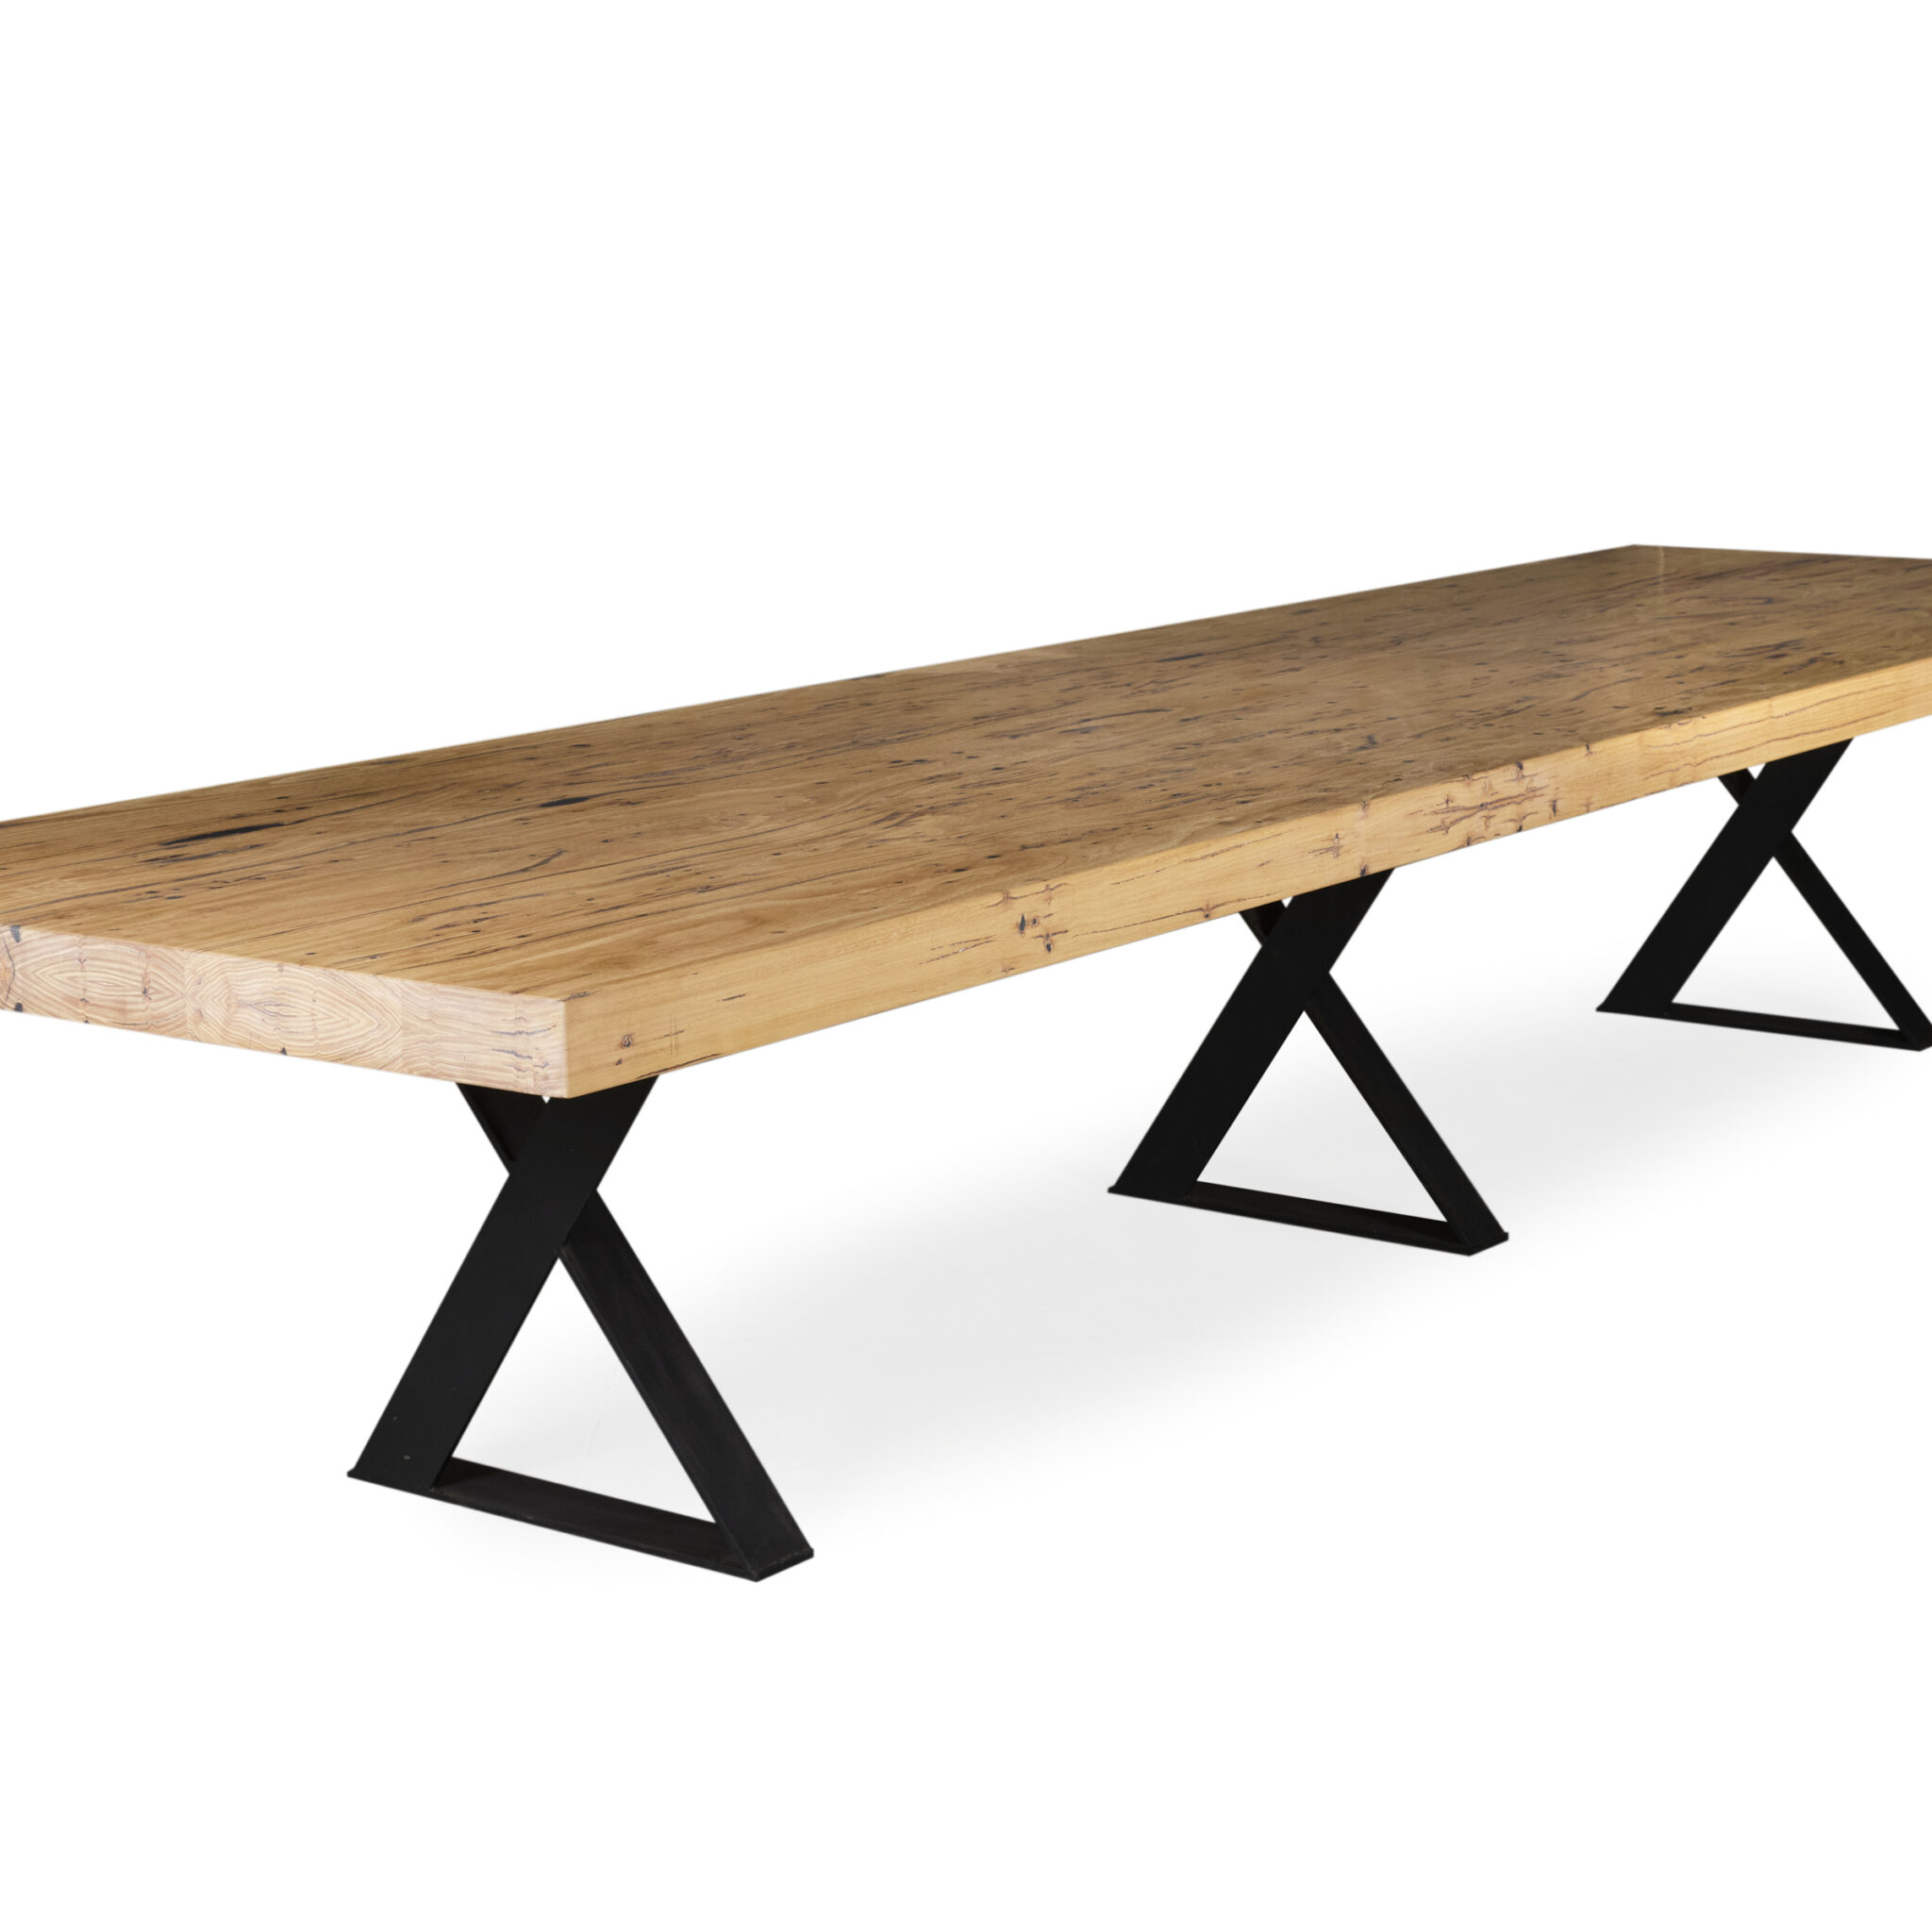 Kros Dining Table: Victorian Ash timber, dimensions L: 4500mm x W: 1200mm x H: 750mm, sleek pencil edge, finished in white oil, supported by U leg base." This alt text succinctly describes the key features of the table.